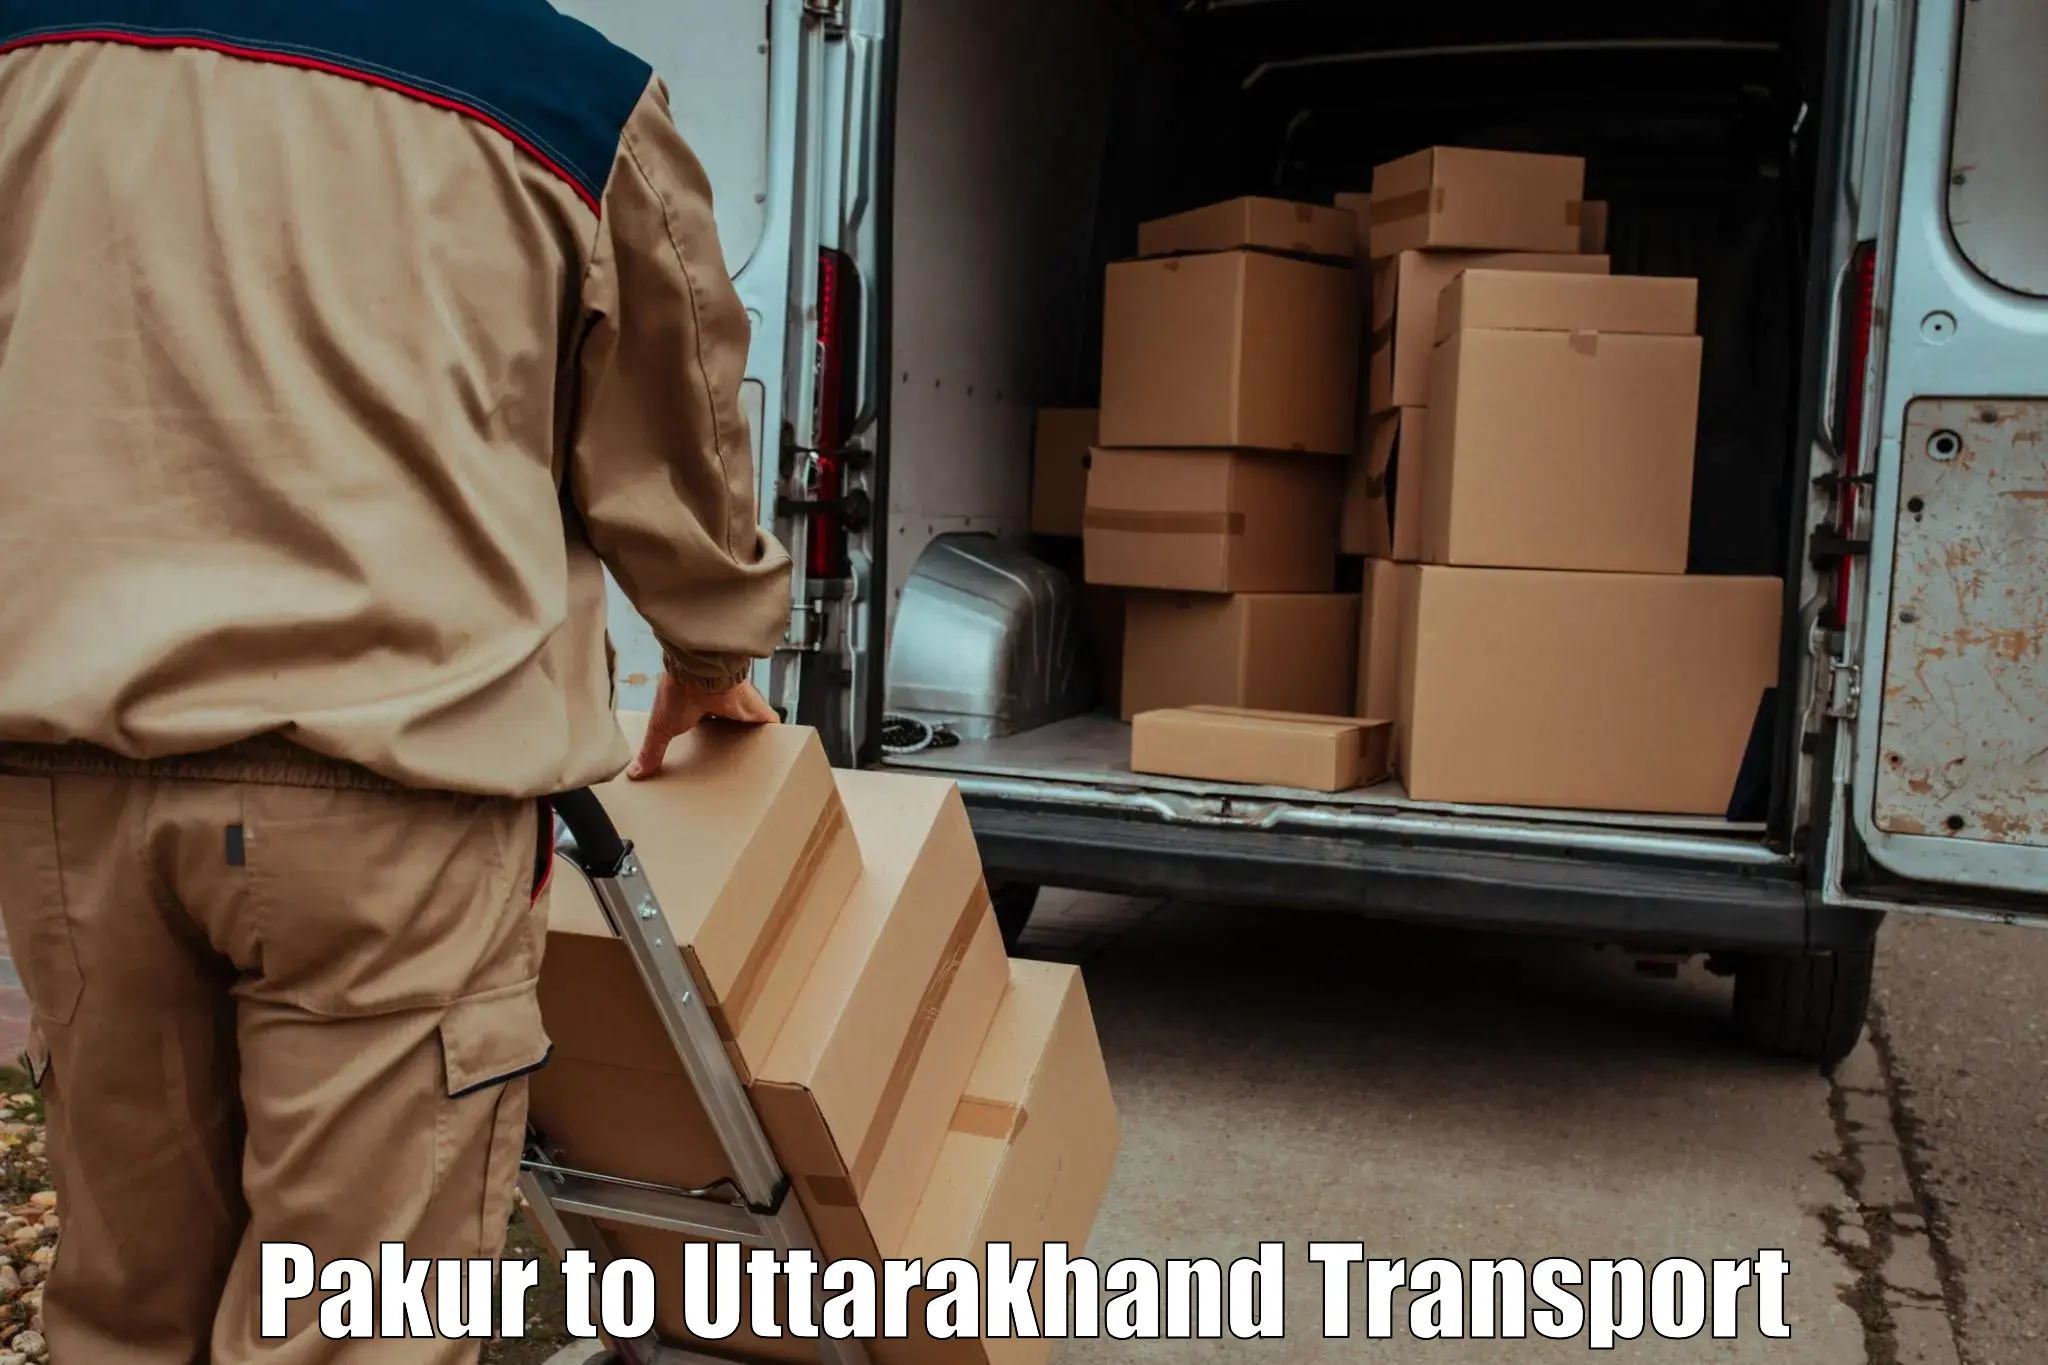 Vehicle transport services Pakur to IIT Roorkee